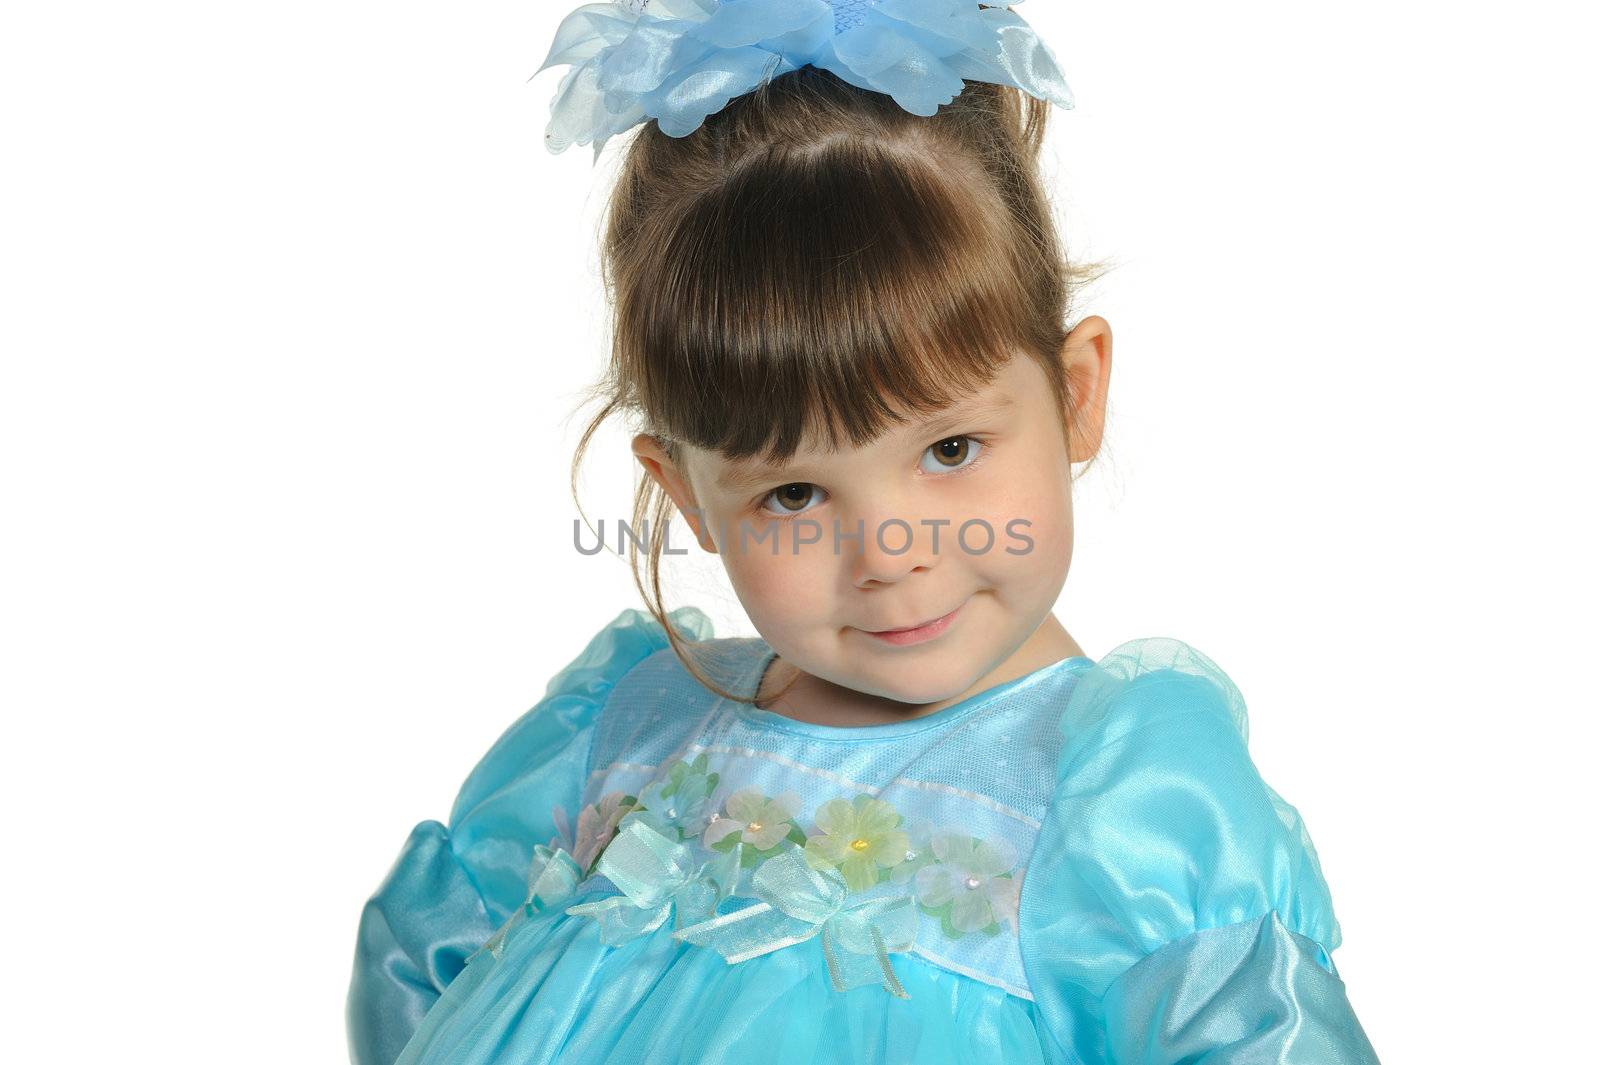 Pretty the little girl in a blue dress by galdzer